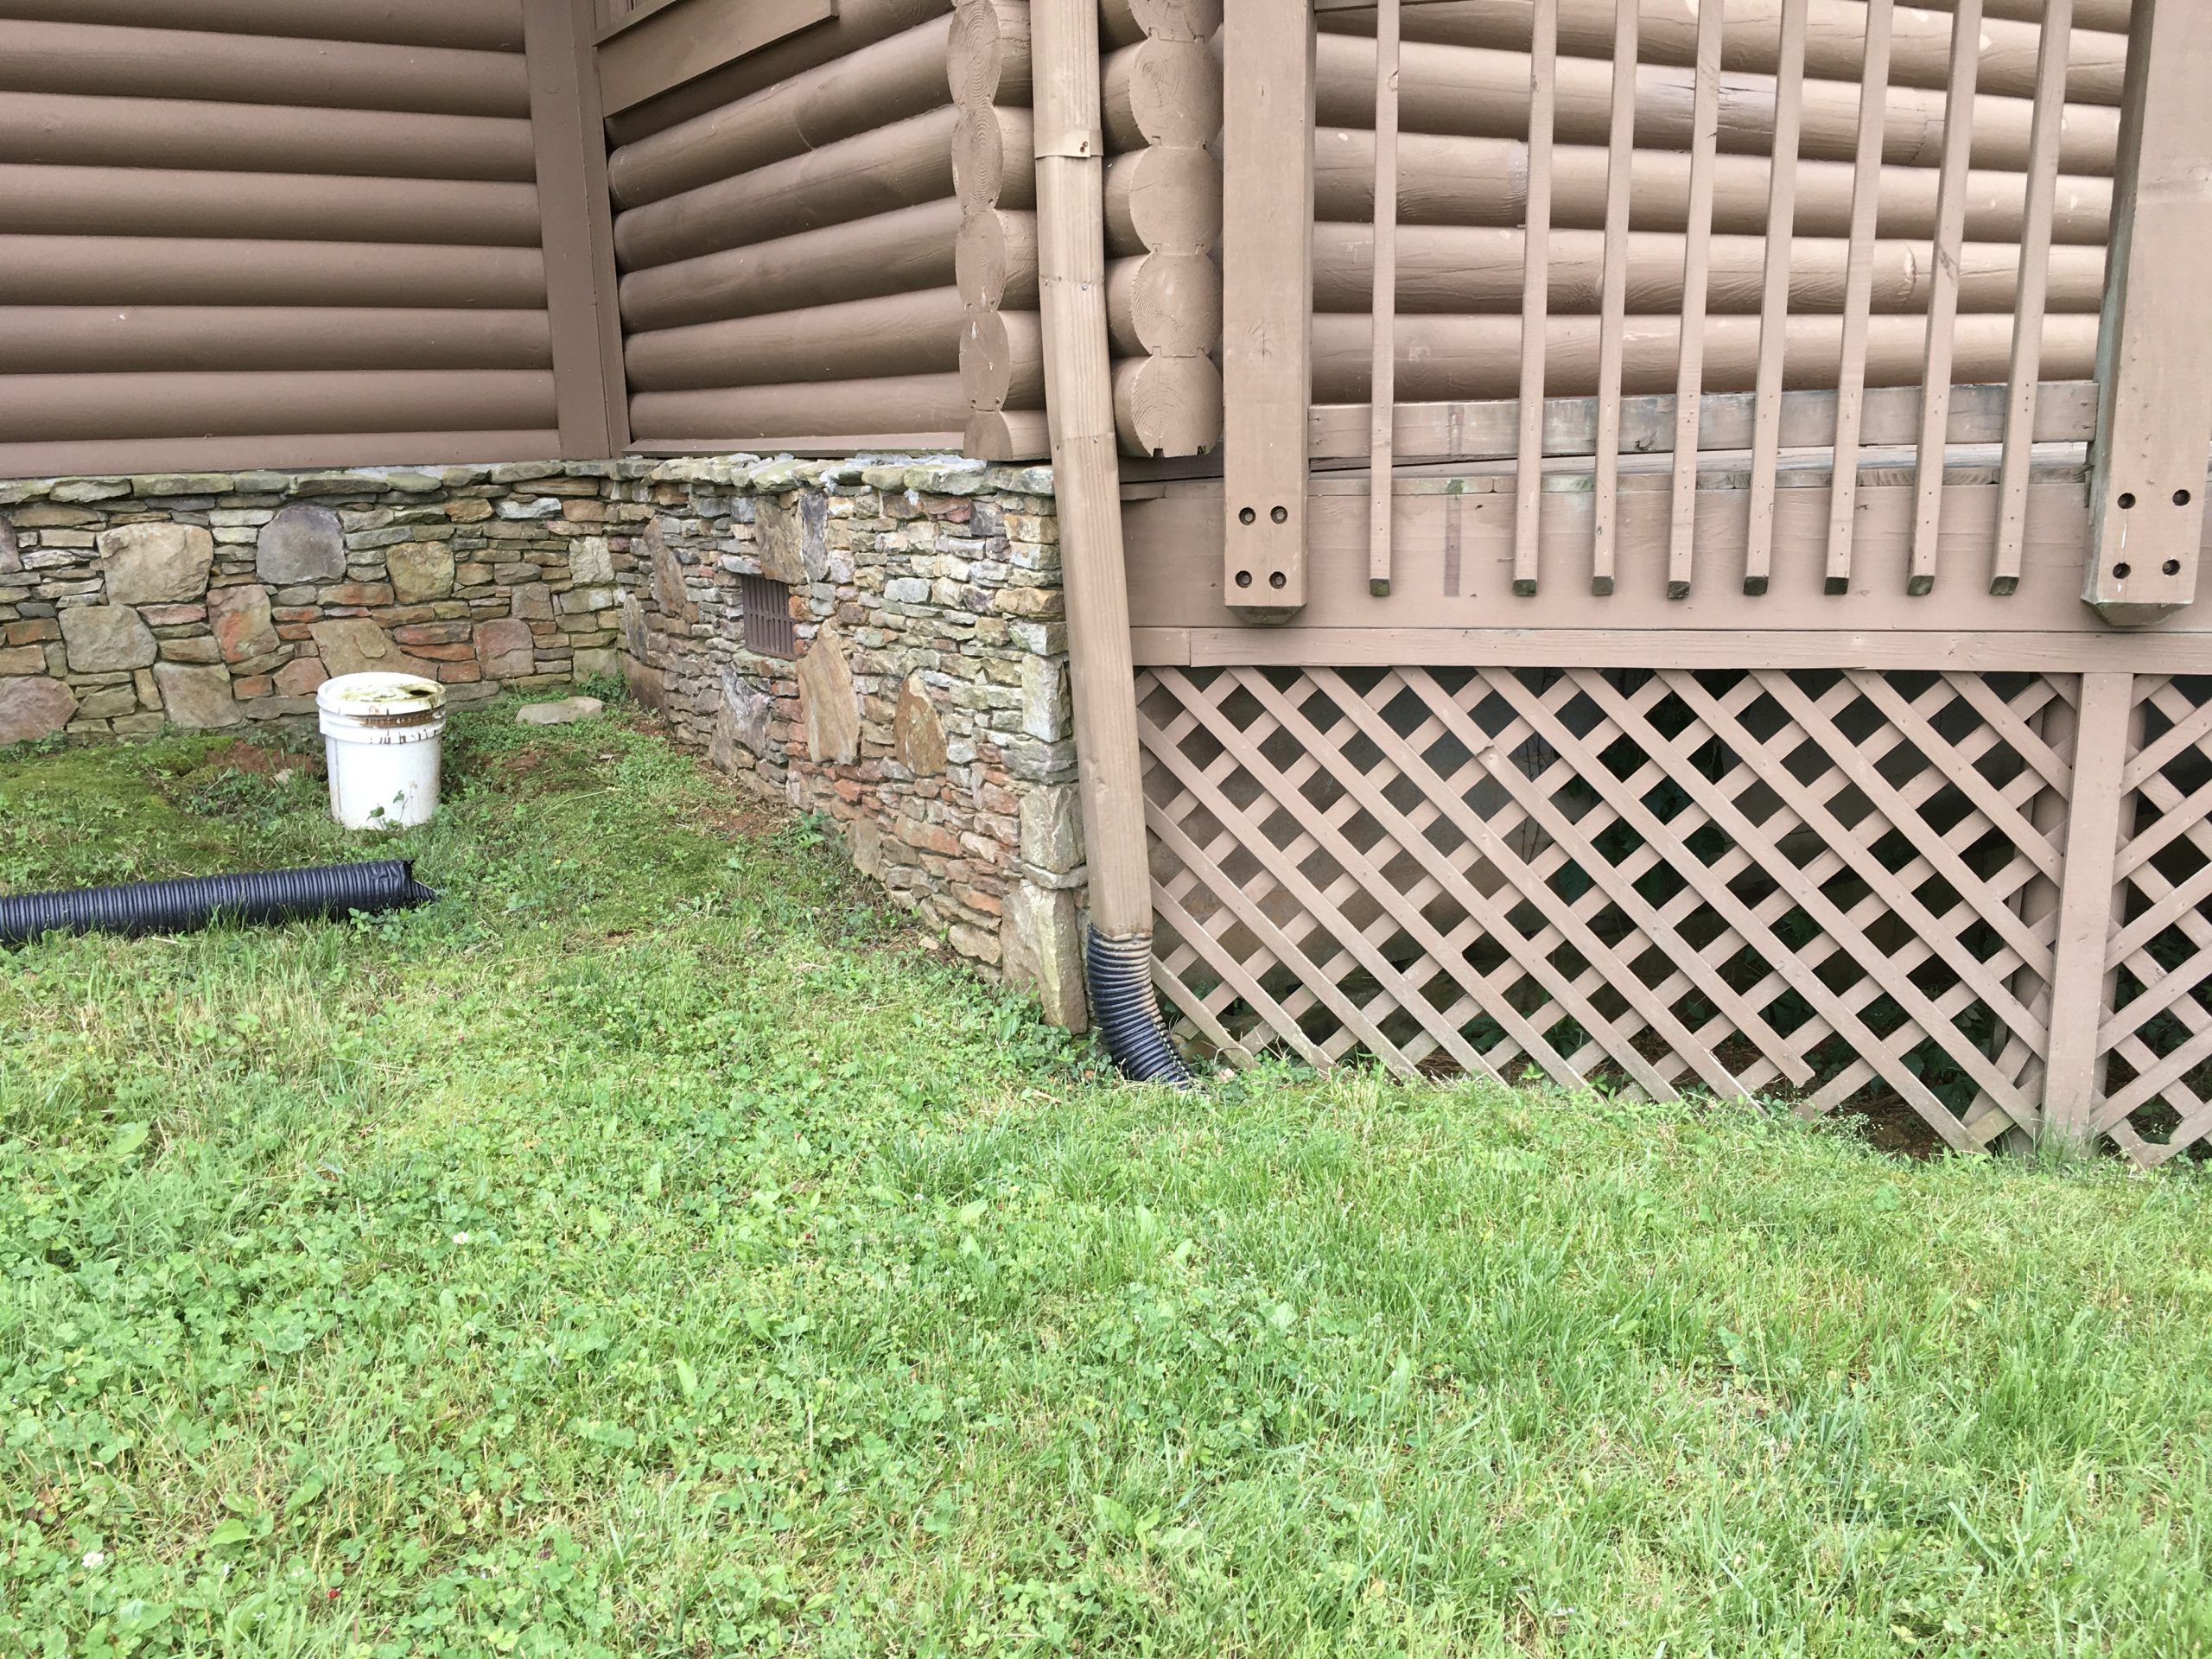 This is an image of downspout at the rear of the house. 